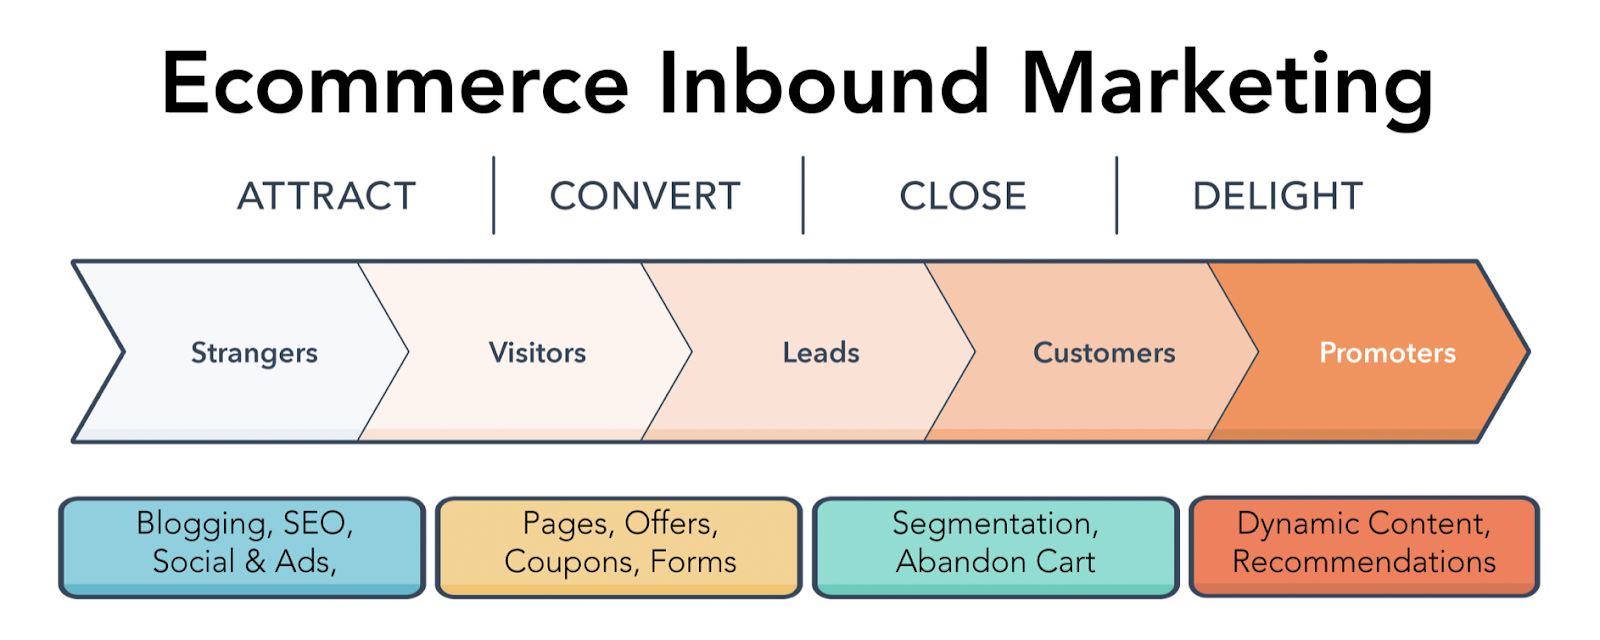 How to Use HubSpot for E-commerce